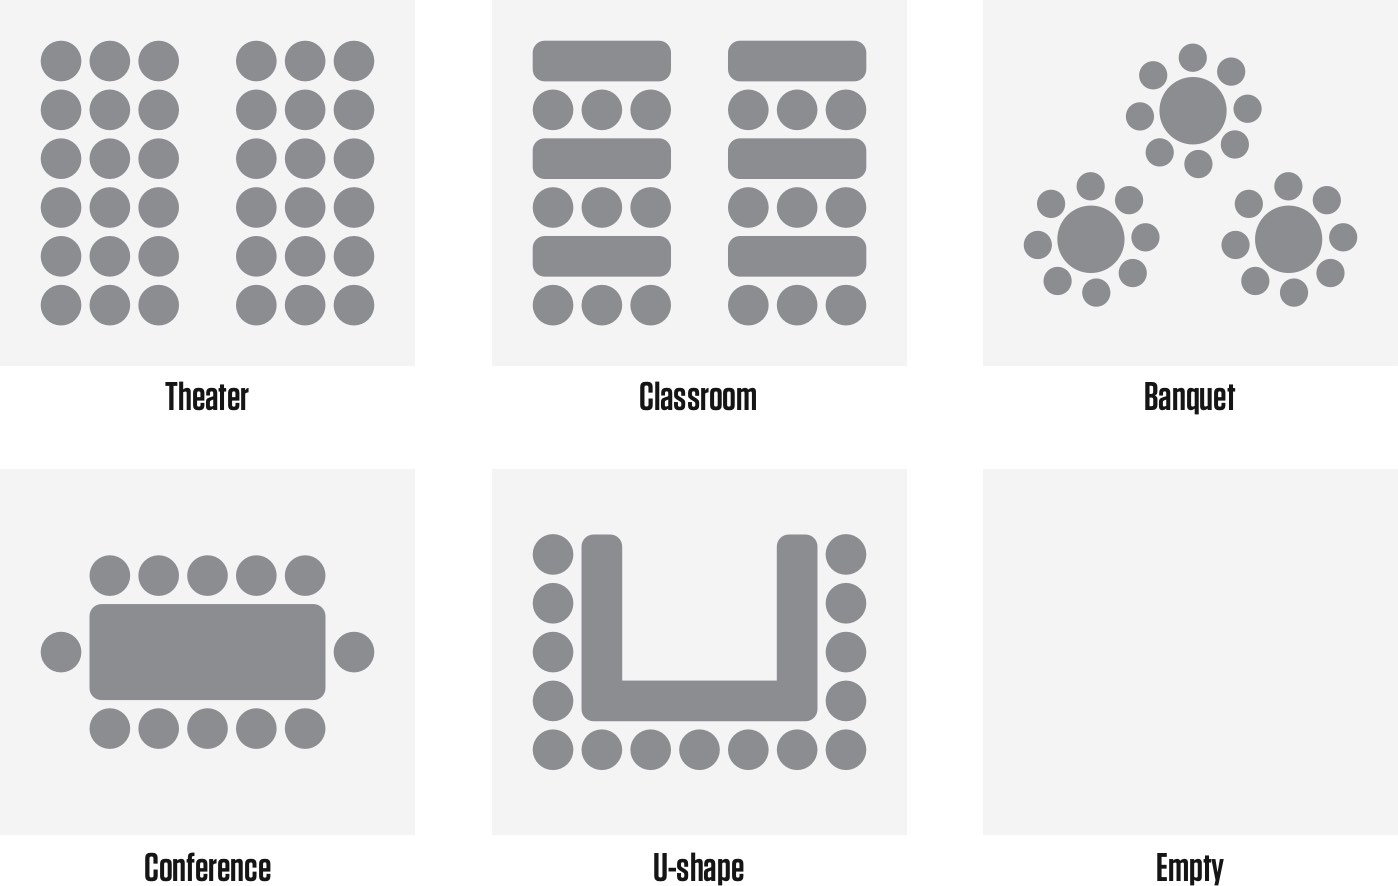 Room layouts include: theater, classroom, banquet, conference, u-shape, and empty room.